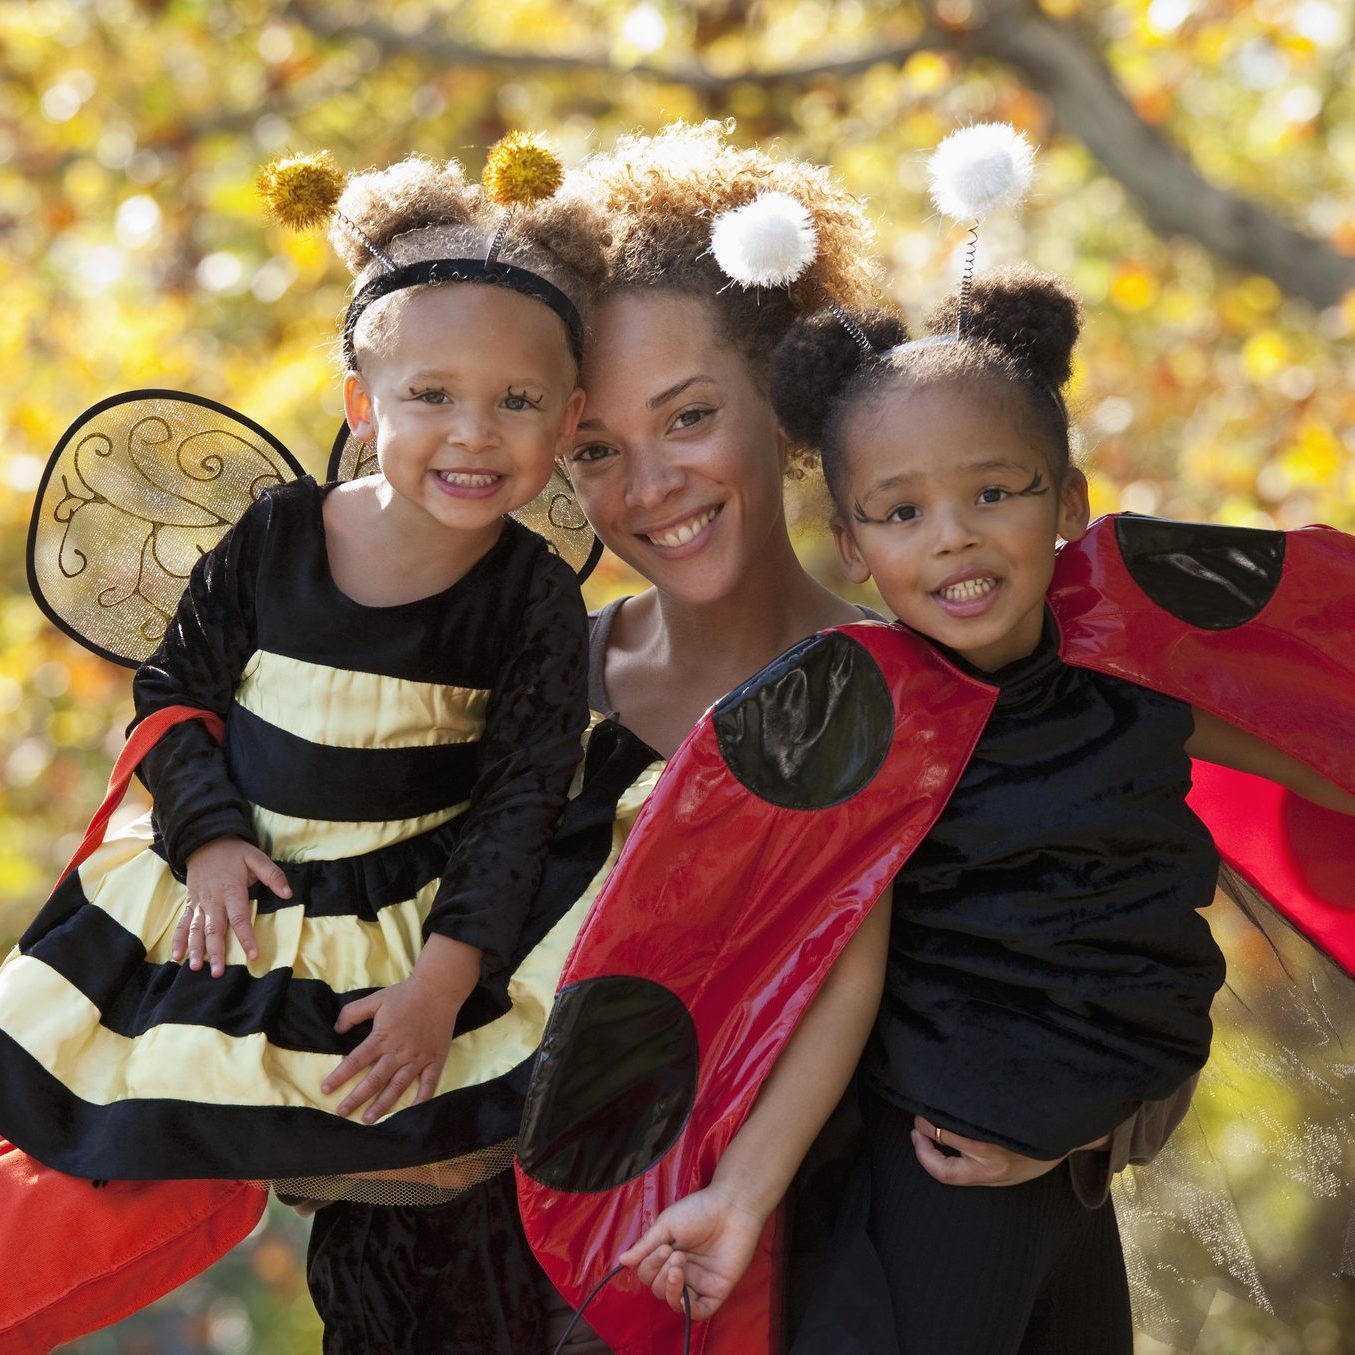 The 50 Best Trending (And Outrageous!) Halloween Costume Ideas  Best group  halloween costumes, Boy halloween costumes, Family halloween costumes